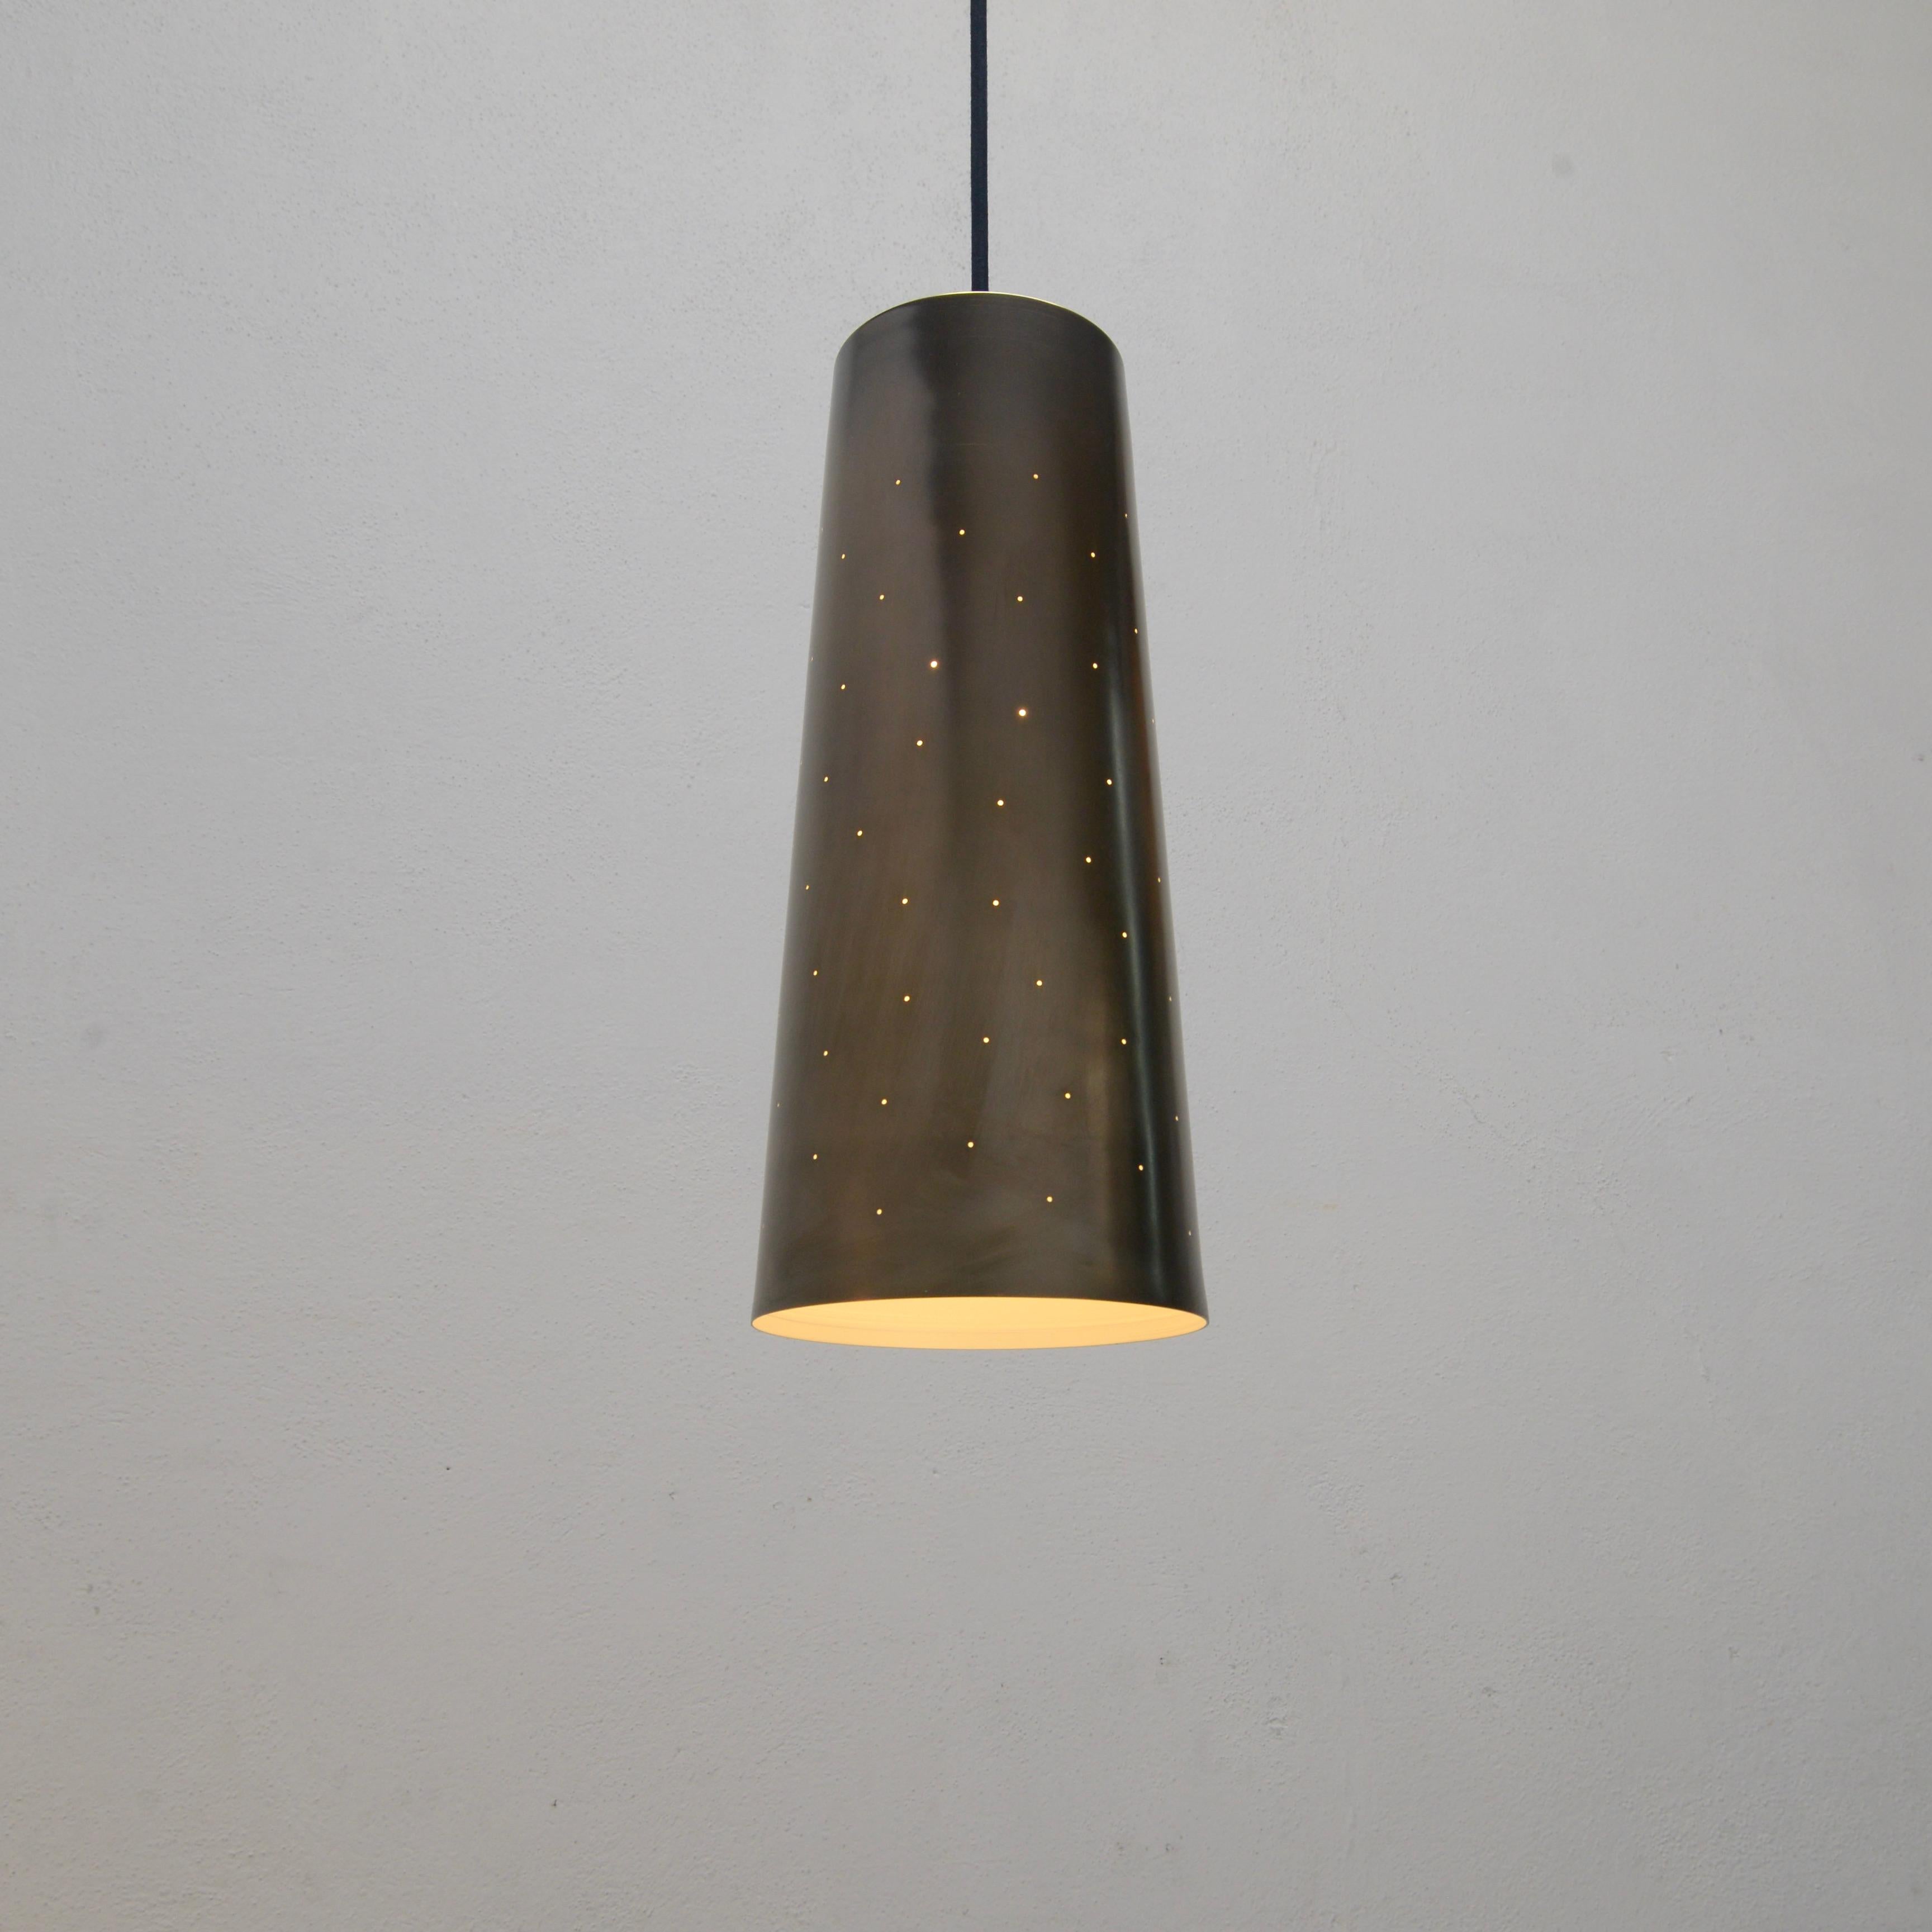 LUrco BR Pendant by Lumfardo Luminaires In New Condition For Sale In Los Angeles, CA